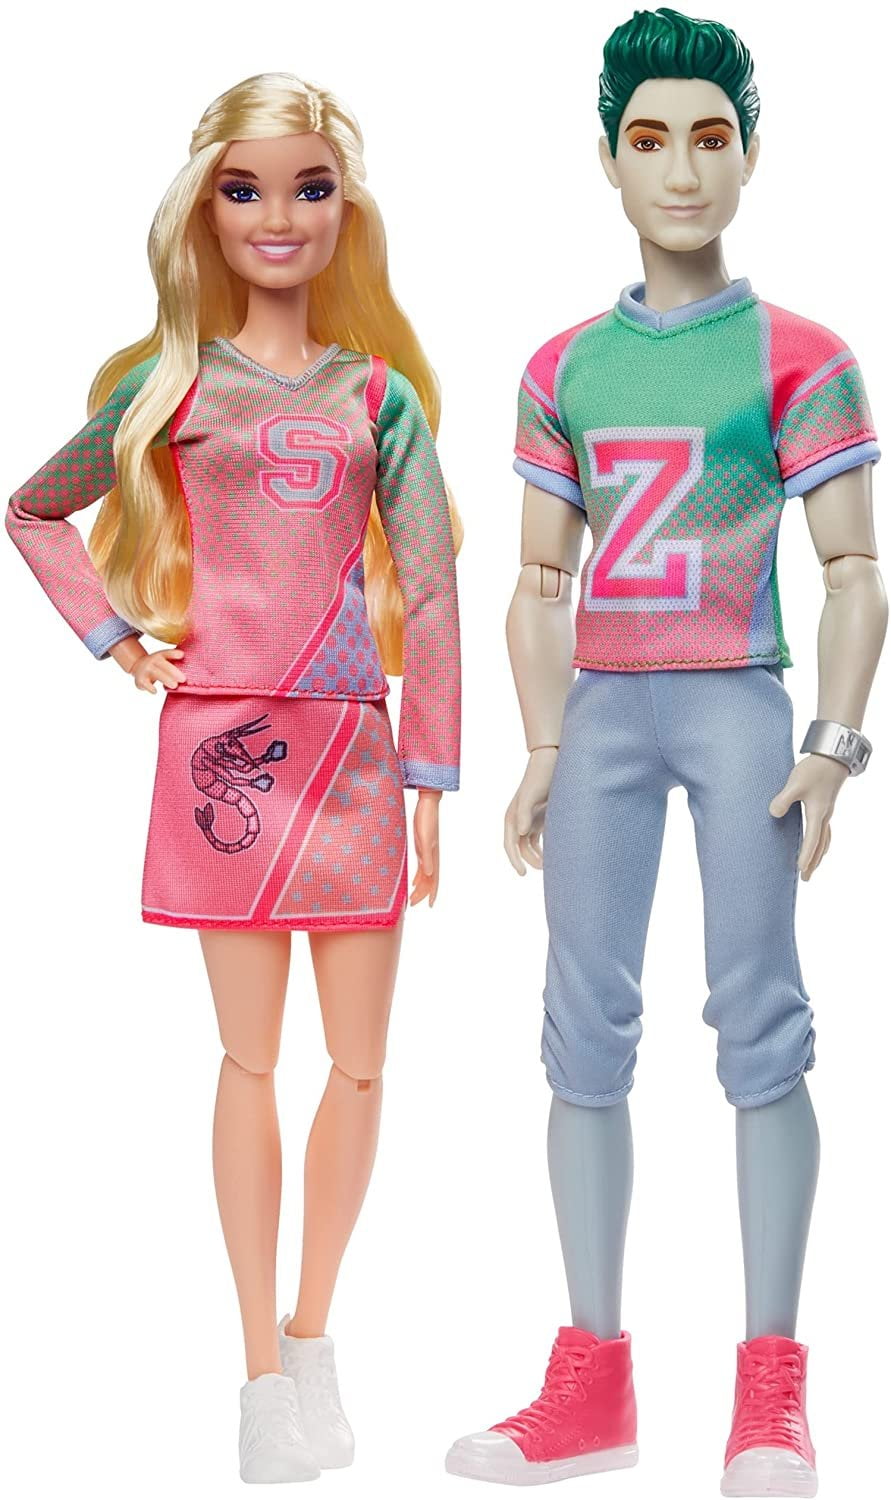 Disney's Zombies 2, Addison Wells Doll (11.5-inch) wearing Cheerleader  Outfit and Accessories, 11 Bendable “Joints,” Great Gift for ages 5+  [